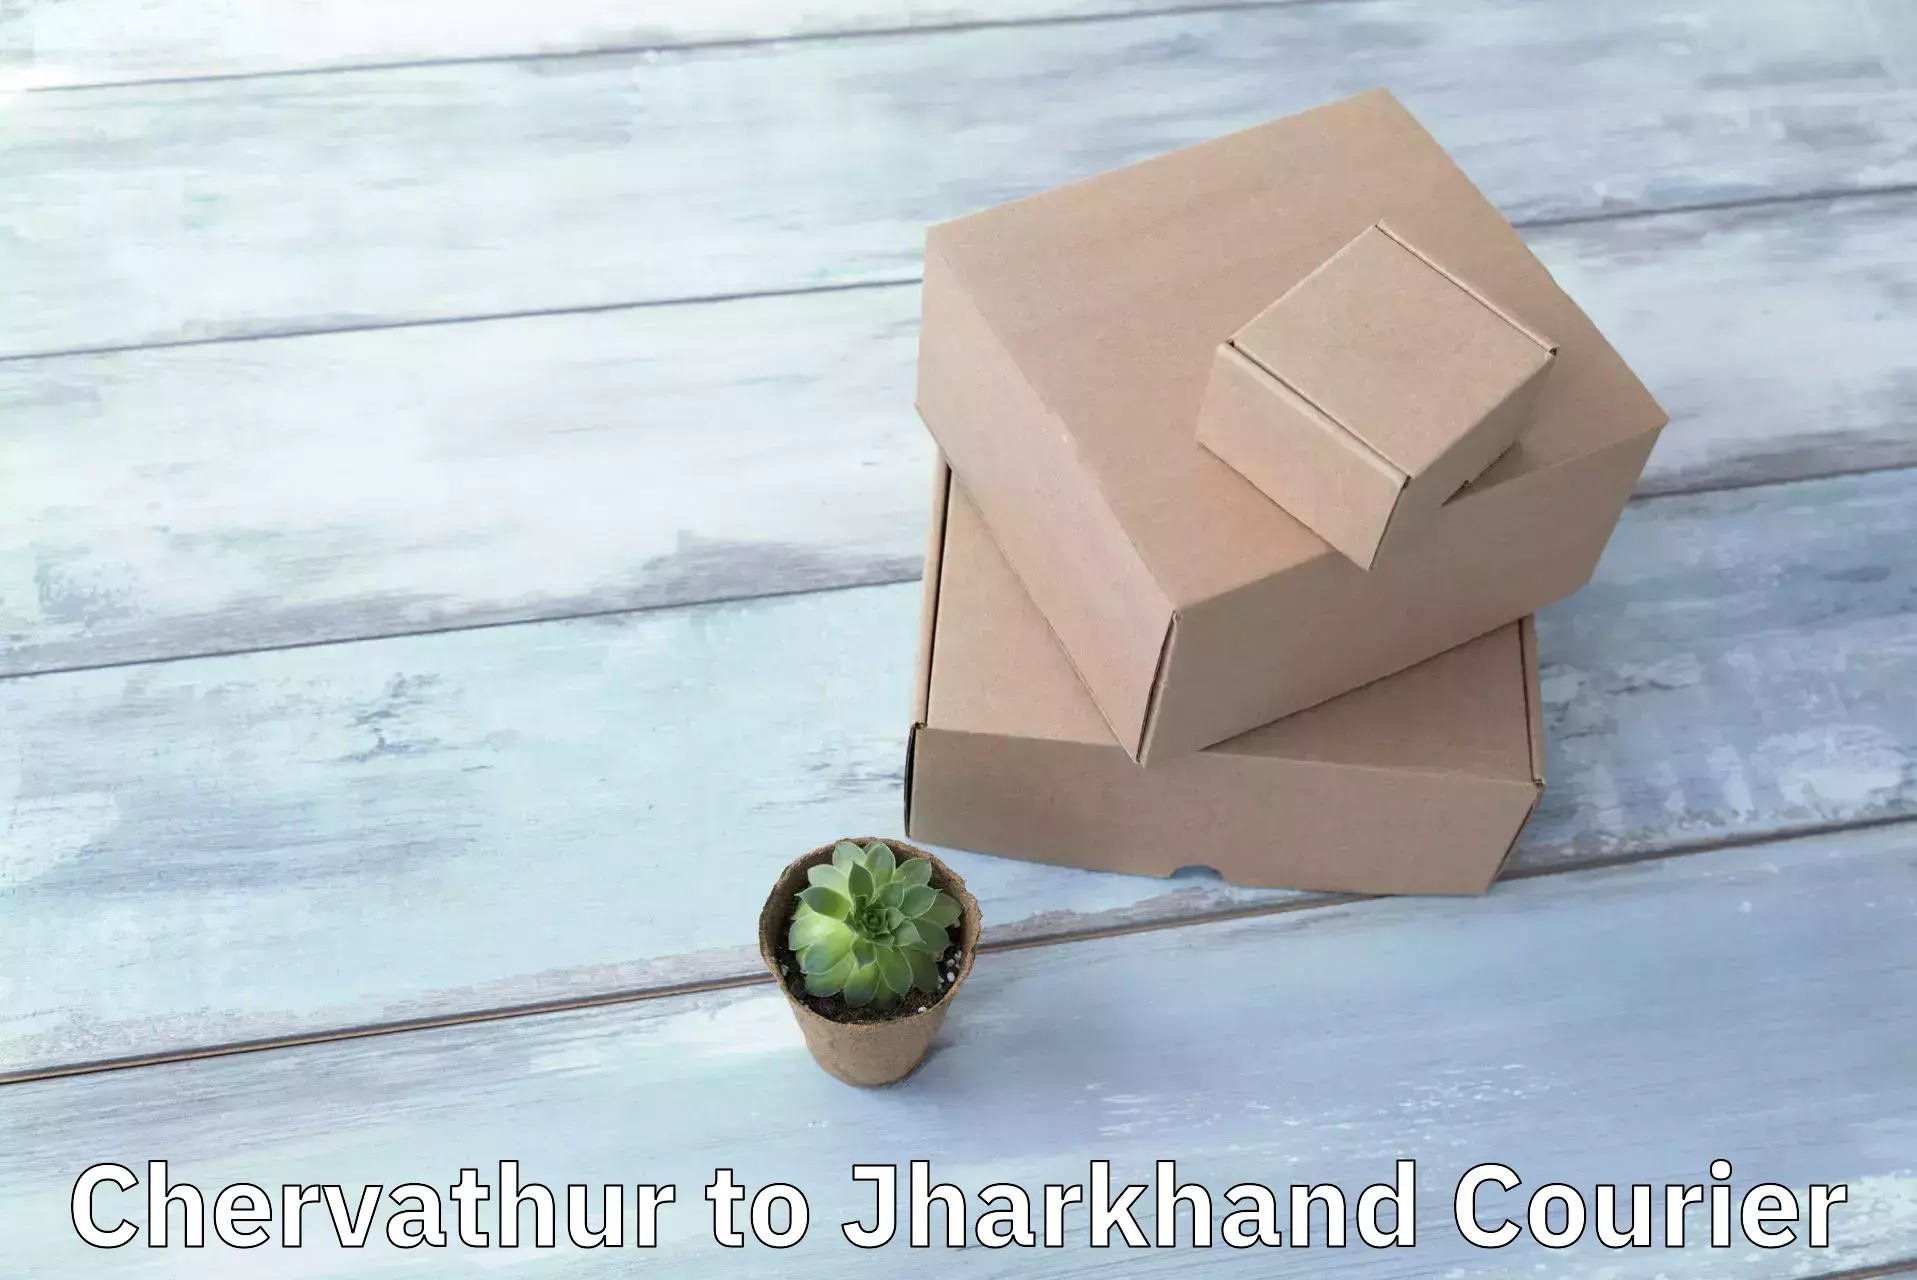 Automated parcel services Chervathur to Dhalbhumgarh